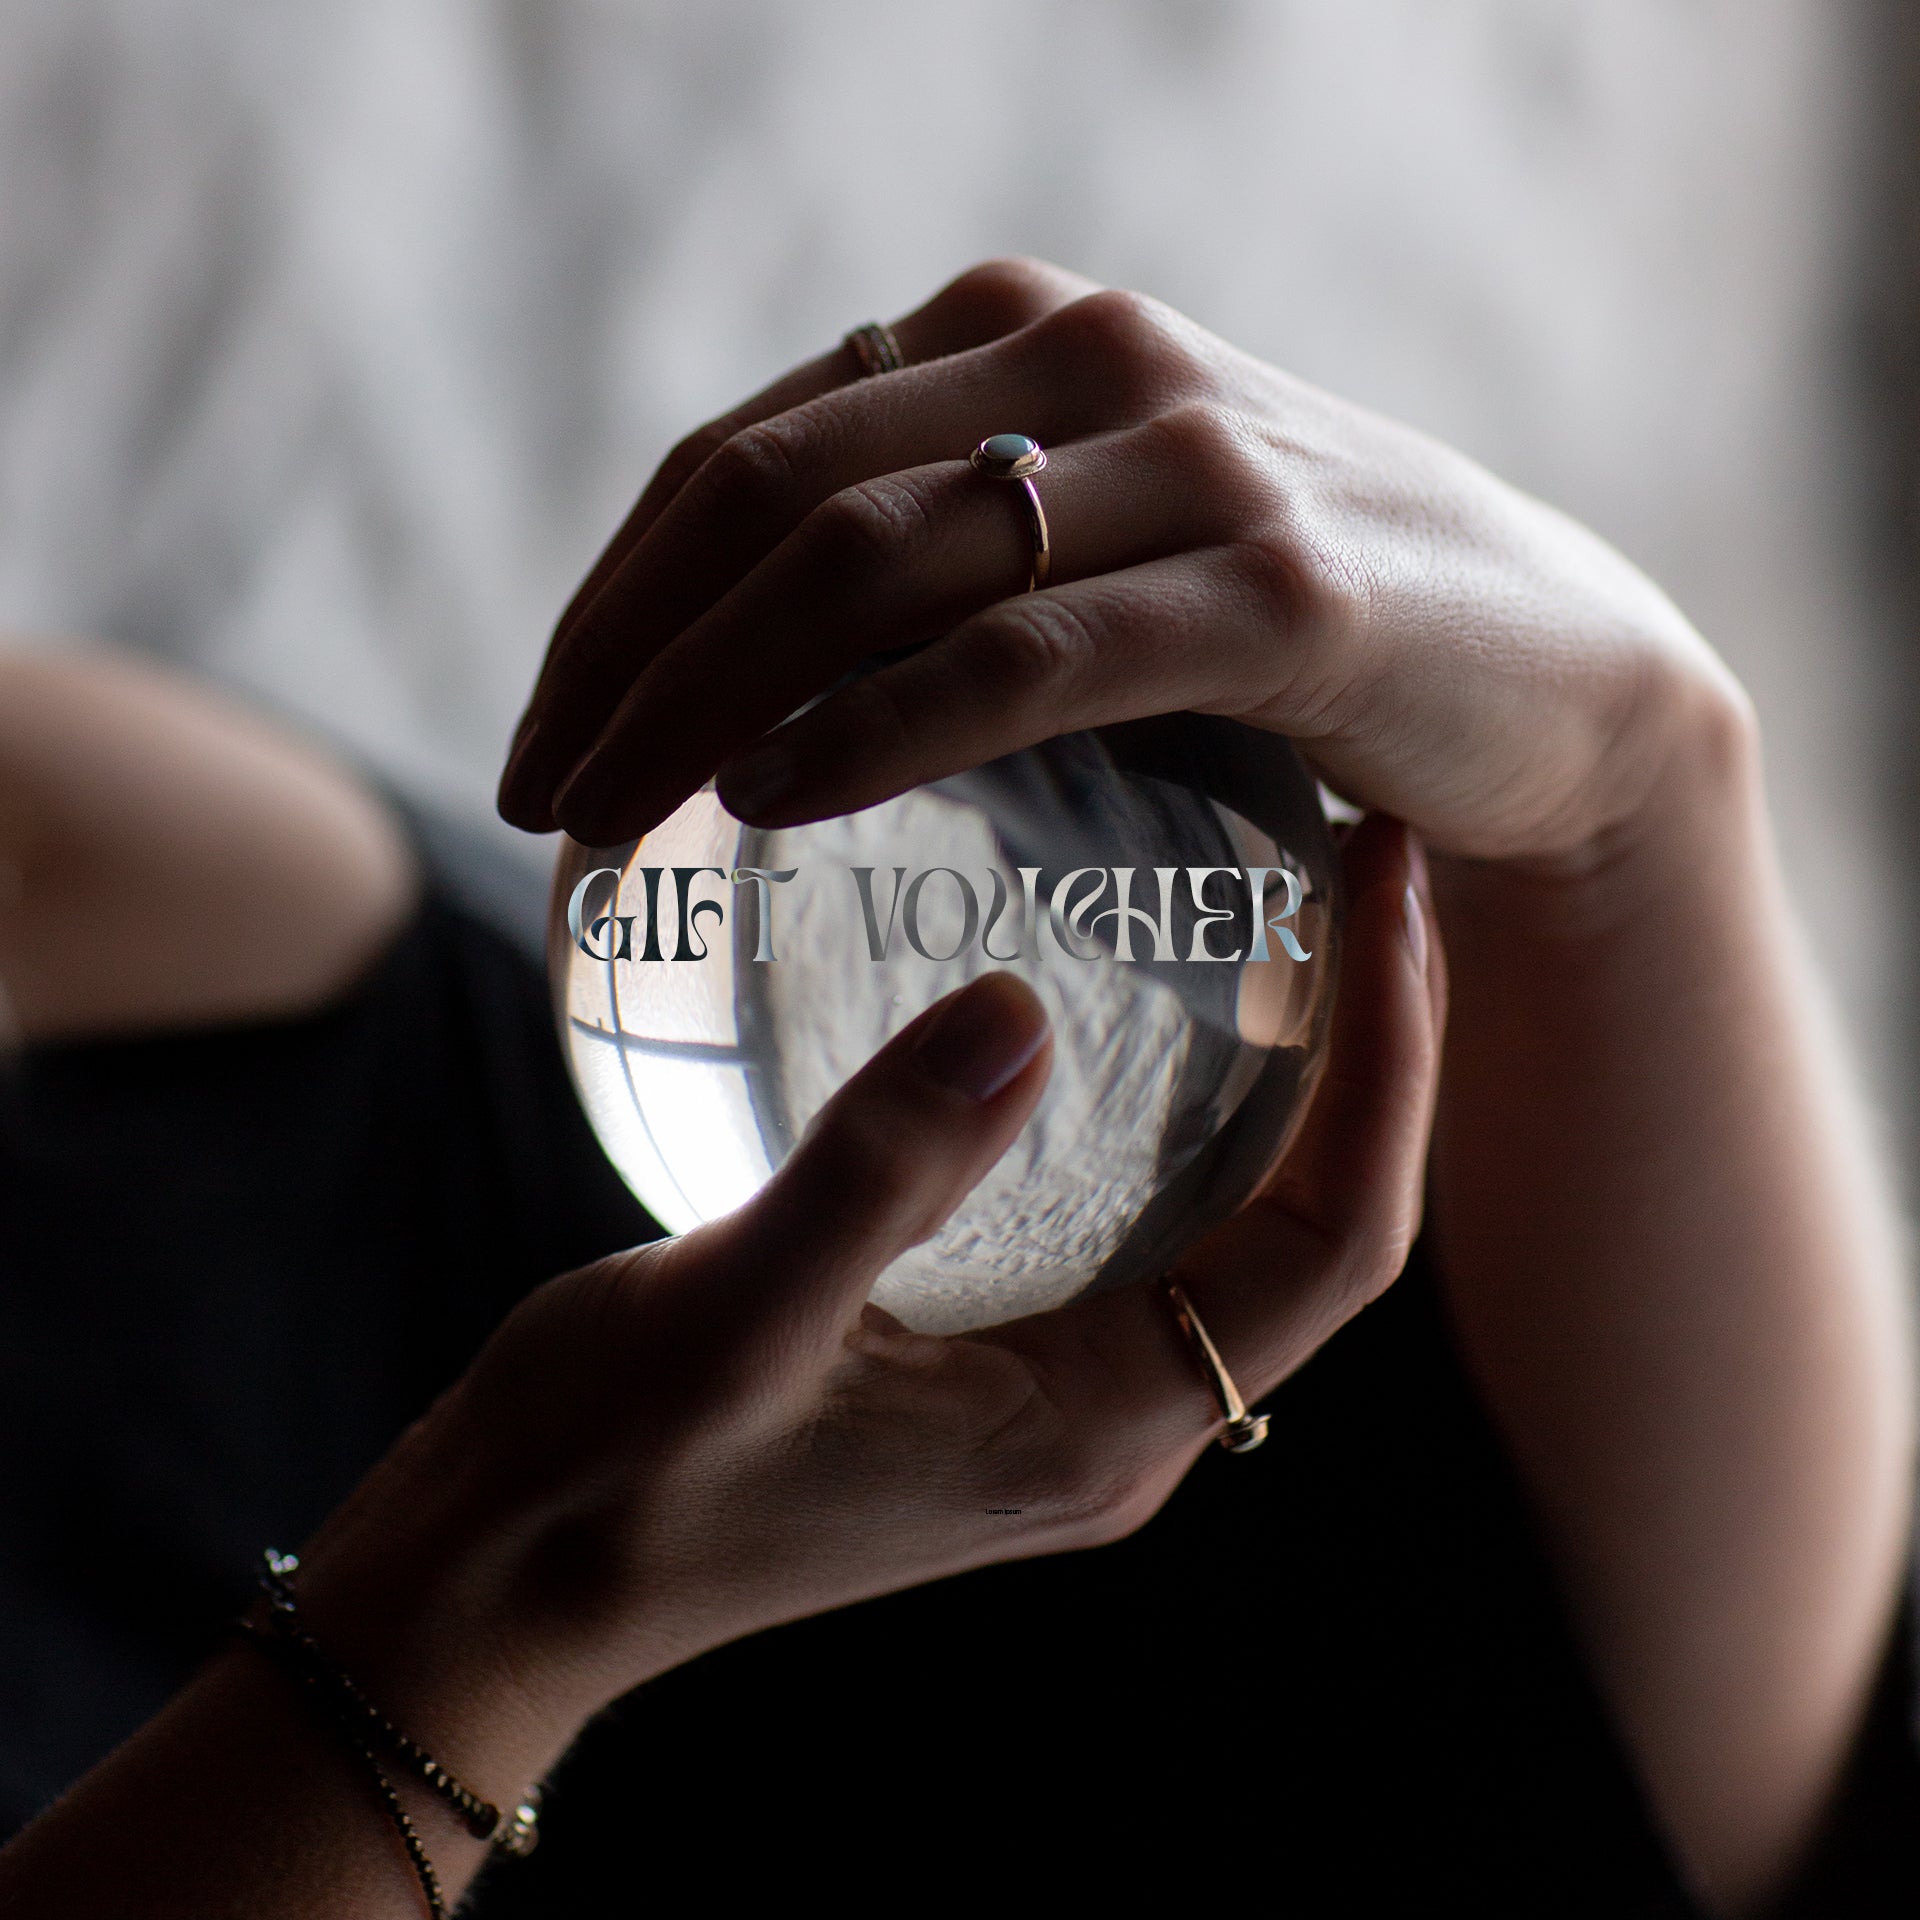 Two hands holding a crystal ball. The hadnds are wearing handmade gold and silver jewellery by Emily Eliza Arlotte, which is handcrafted in Tasmania, Australia. The crystal balls has the words GIFT VOUCHER overlayed on it.